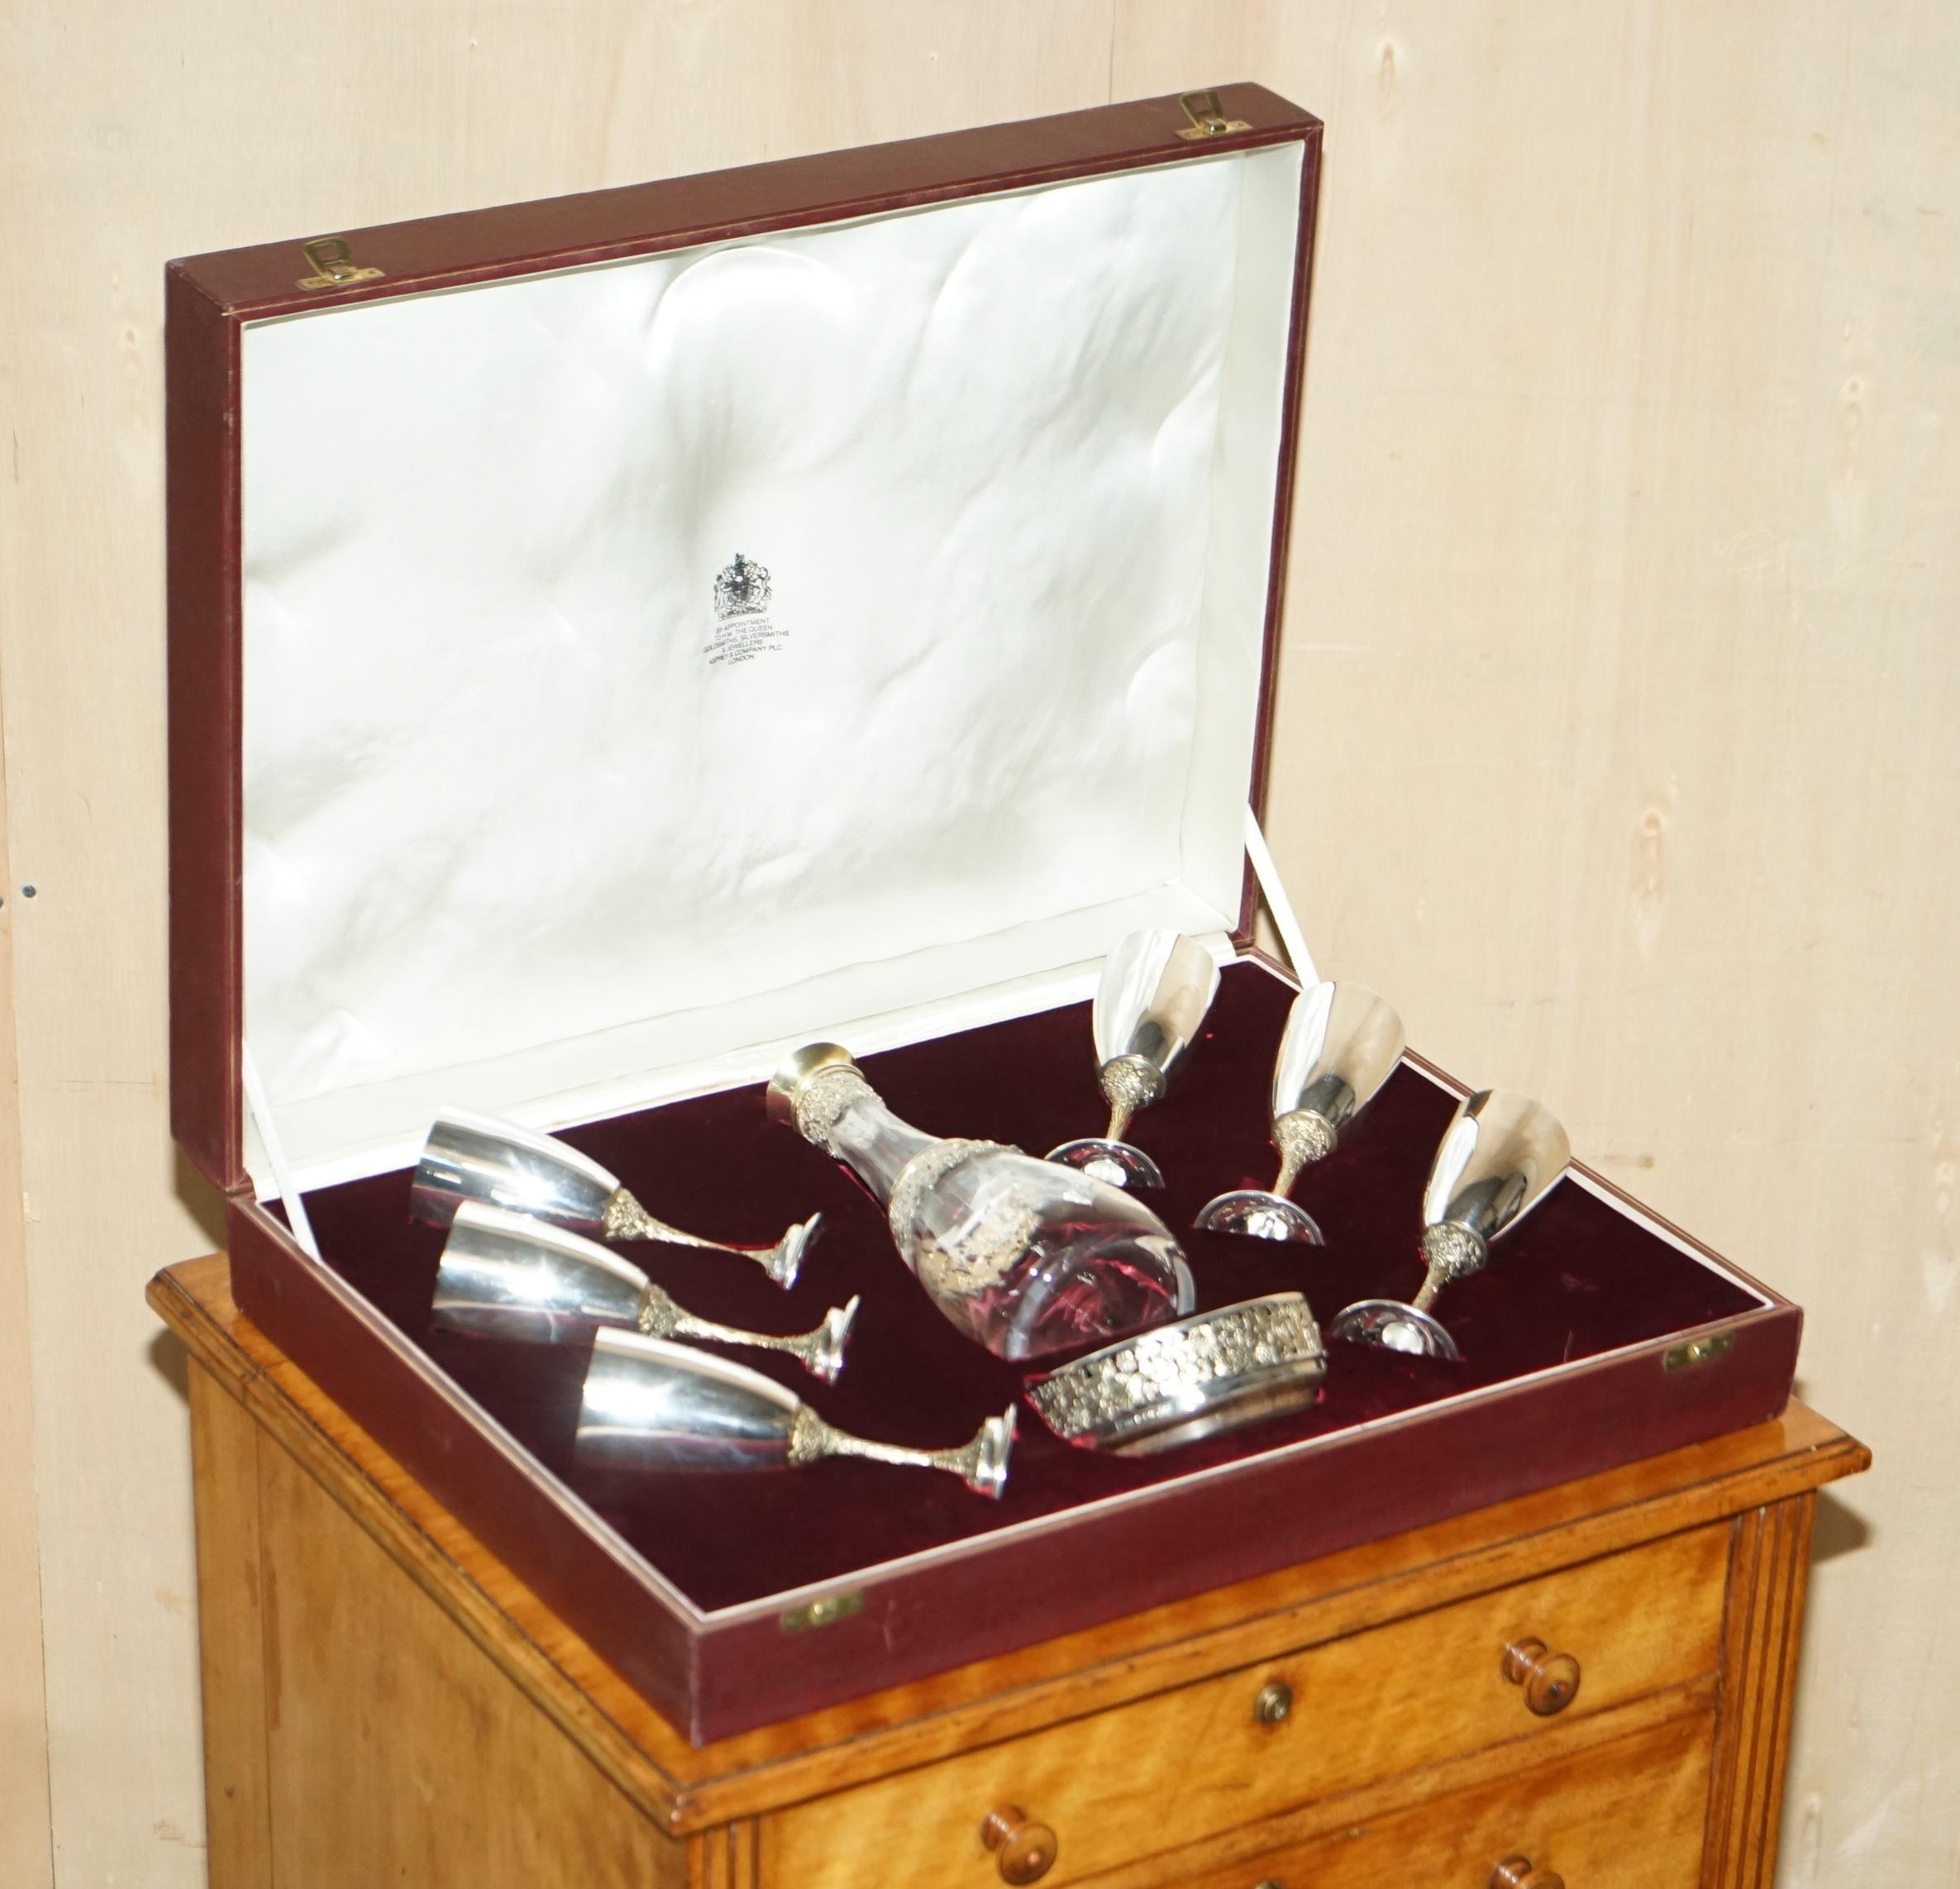 We are delighted to offer for sale this extremely rare and highly collectable, finest quality, HM Stamped, Asprey London solid Sterling Silver & Gold Gilt 1983 Decanter set complete with base and six goblets, by Appointment to Her Majesty Queen